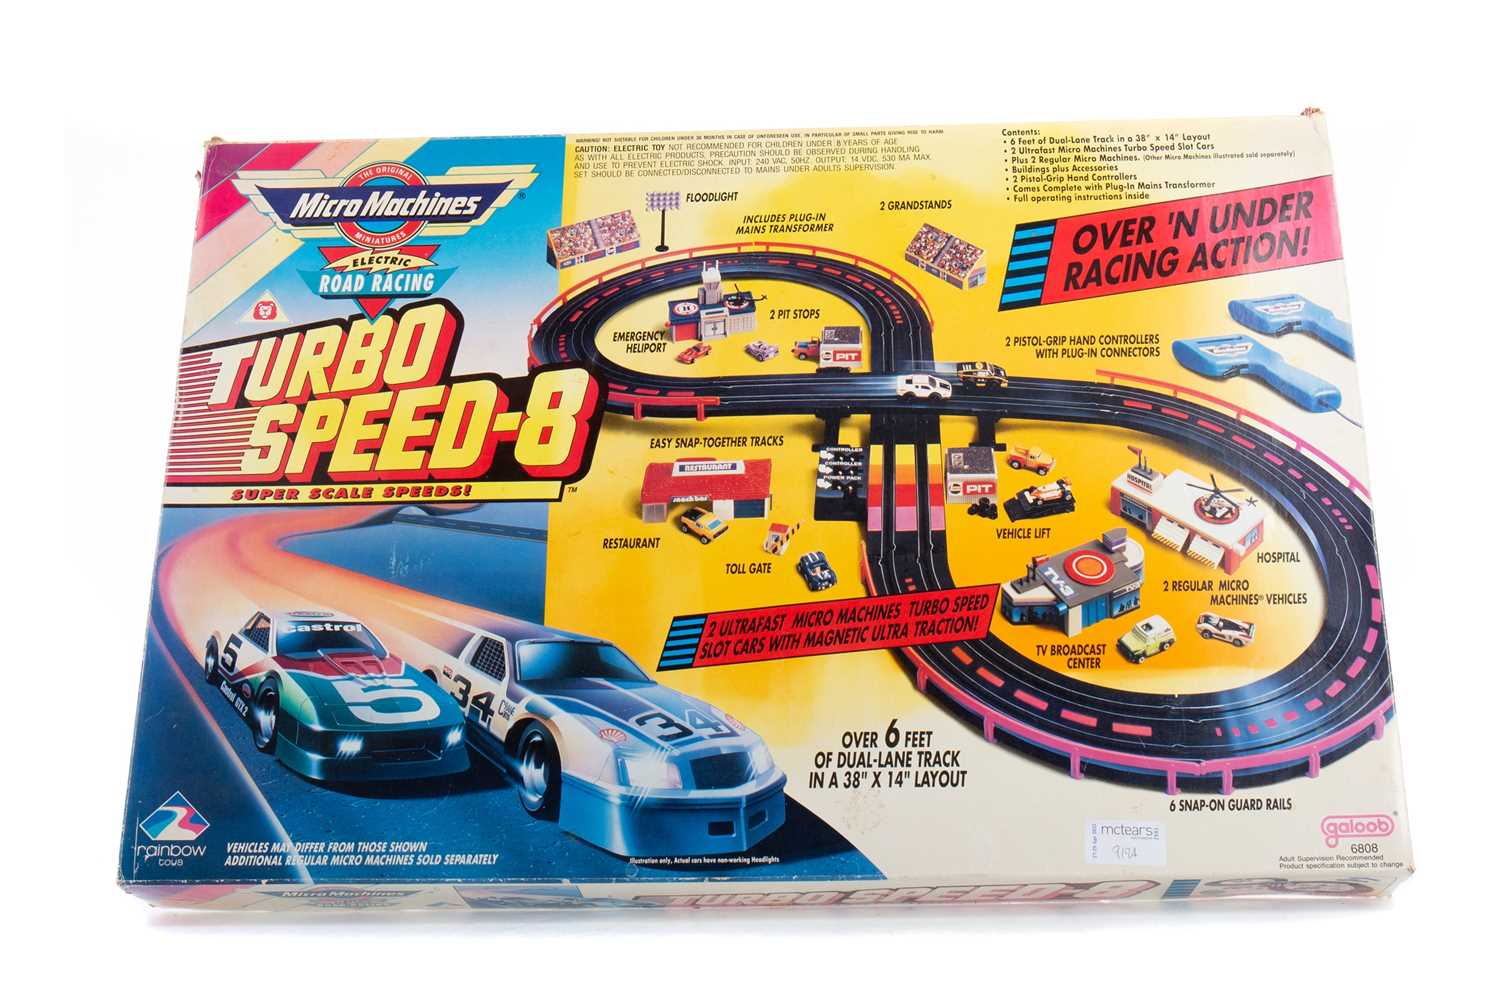 Lot 919 - A MICROMACHINES ELECTRIC ROAD RACING TURBO SPEED-8 SET